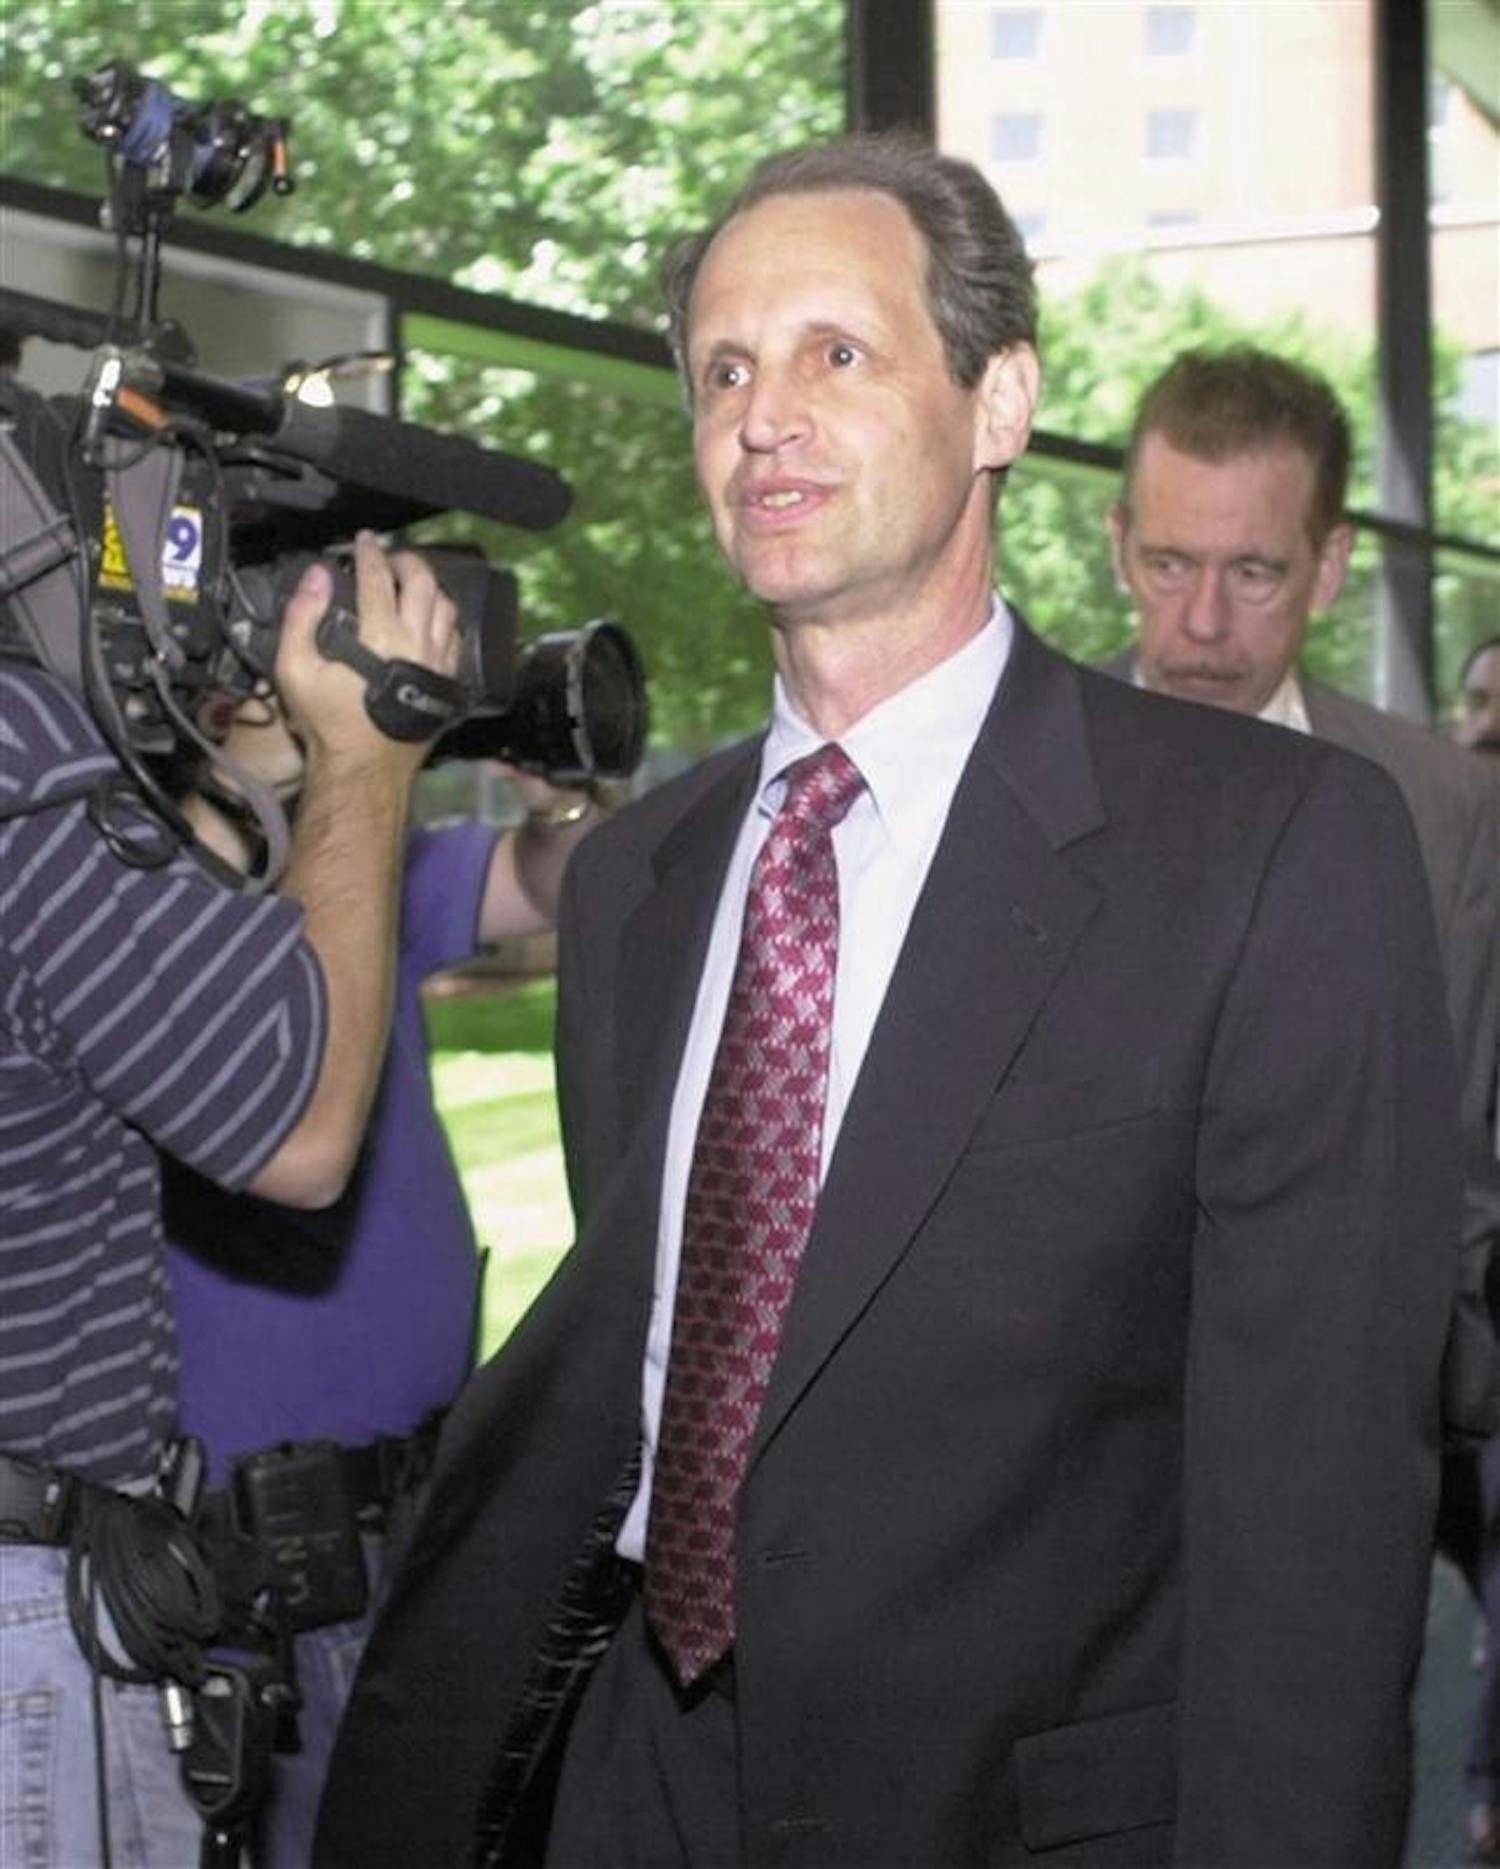 Indiana University trustee Stephen Backer enters a board of trustees meeting in Indianapolis May 14, 2000, to discuss their investigation into basketball coach Bob Knight's behavior.